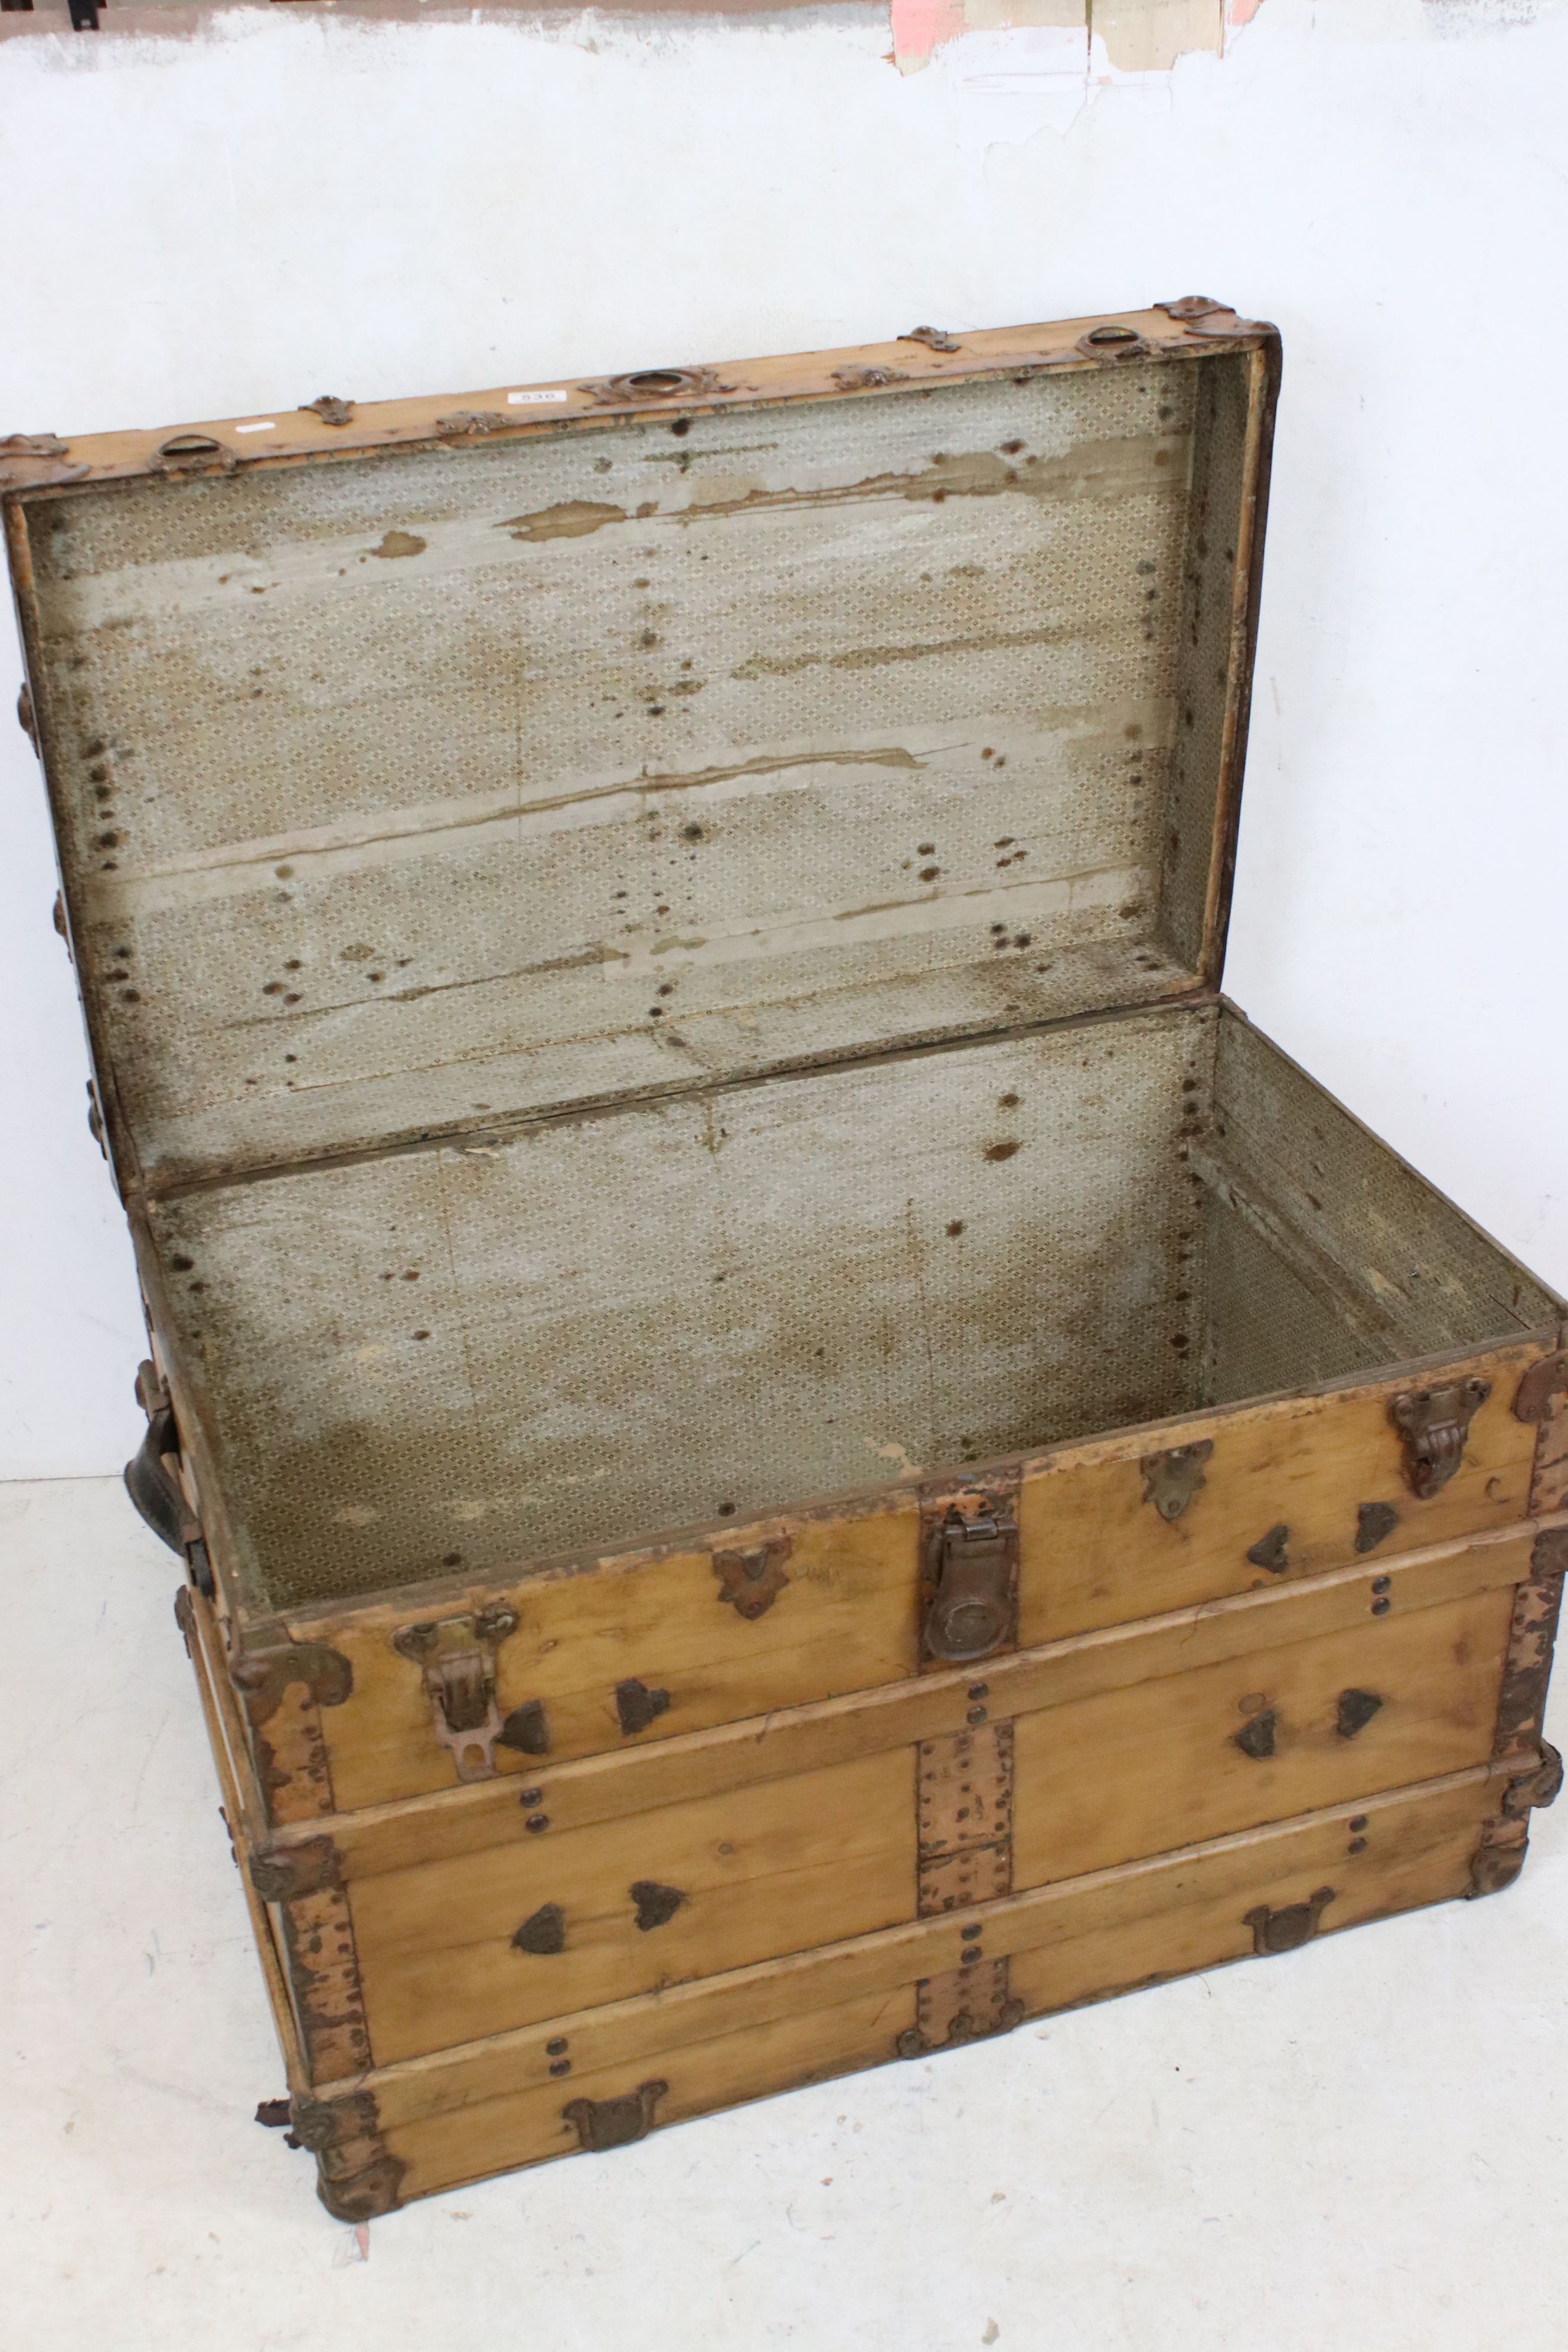 19th century Pine and Studded Travelling Trunk / Box with leather carrying handles, 87cm wide x 58cm - Image 2 of 7